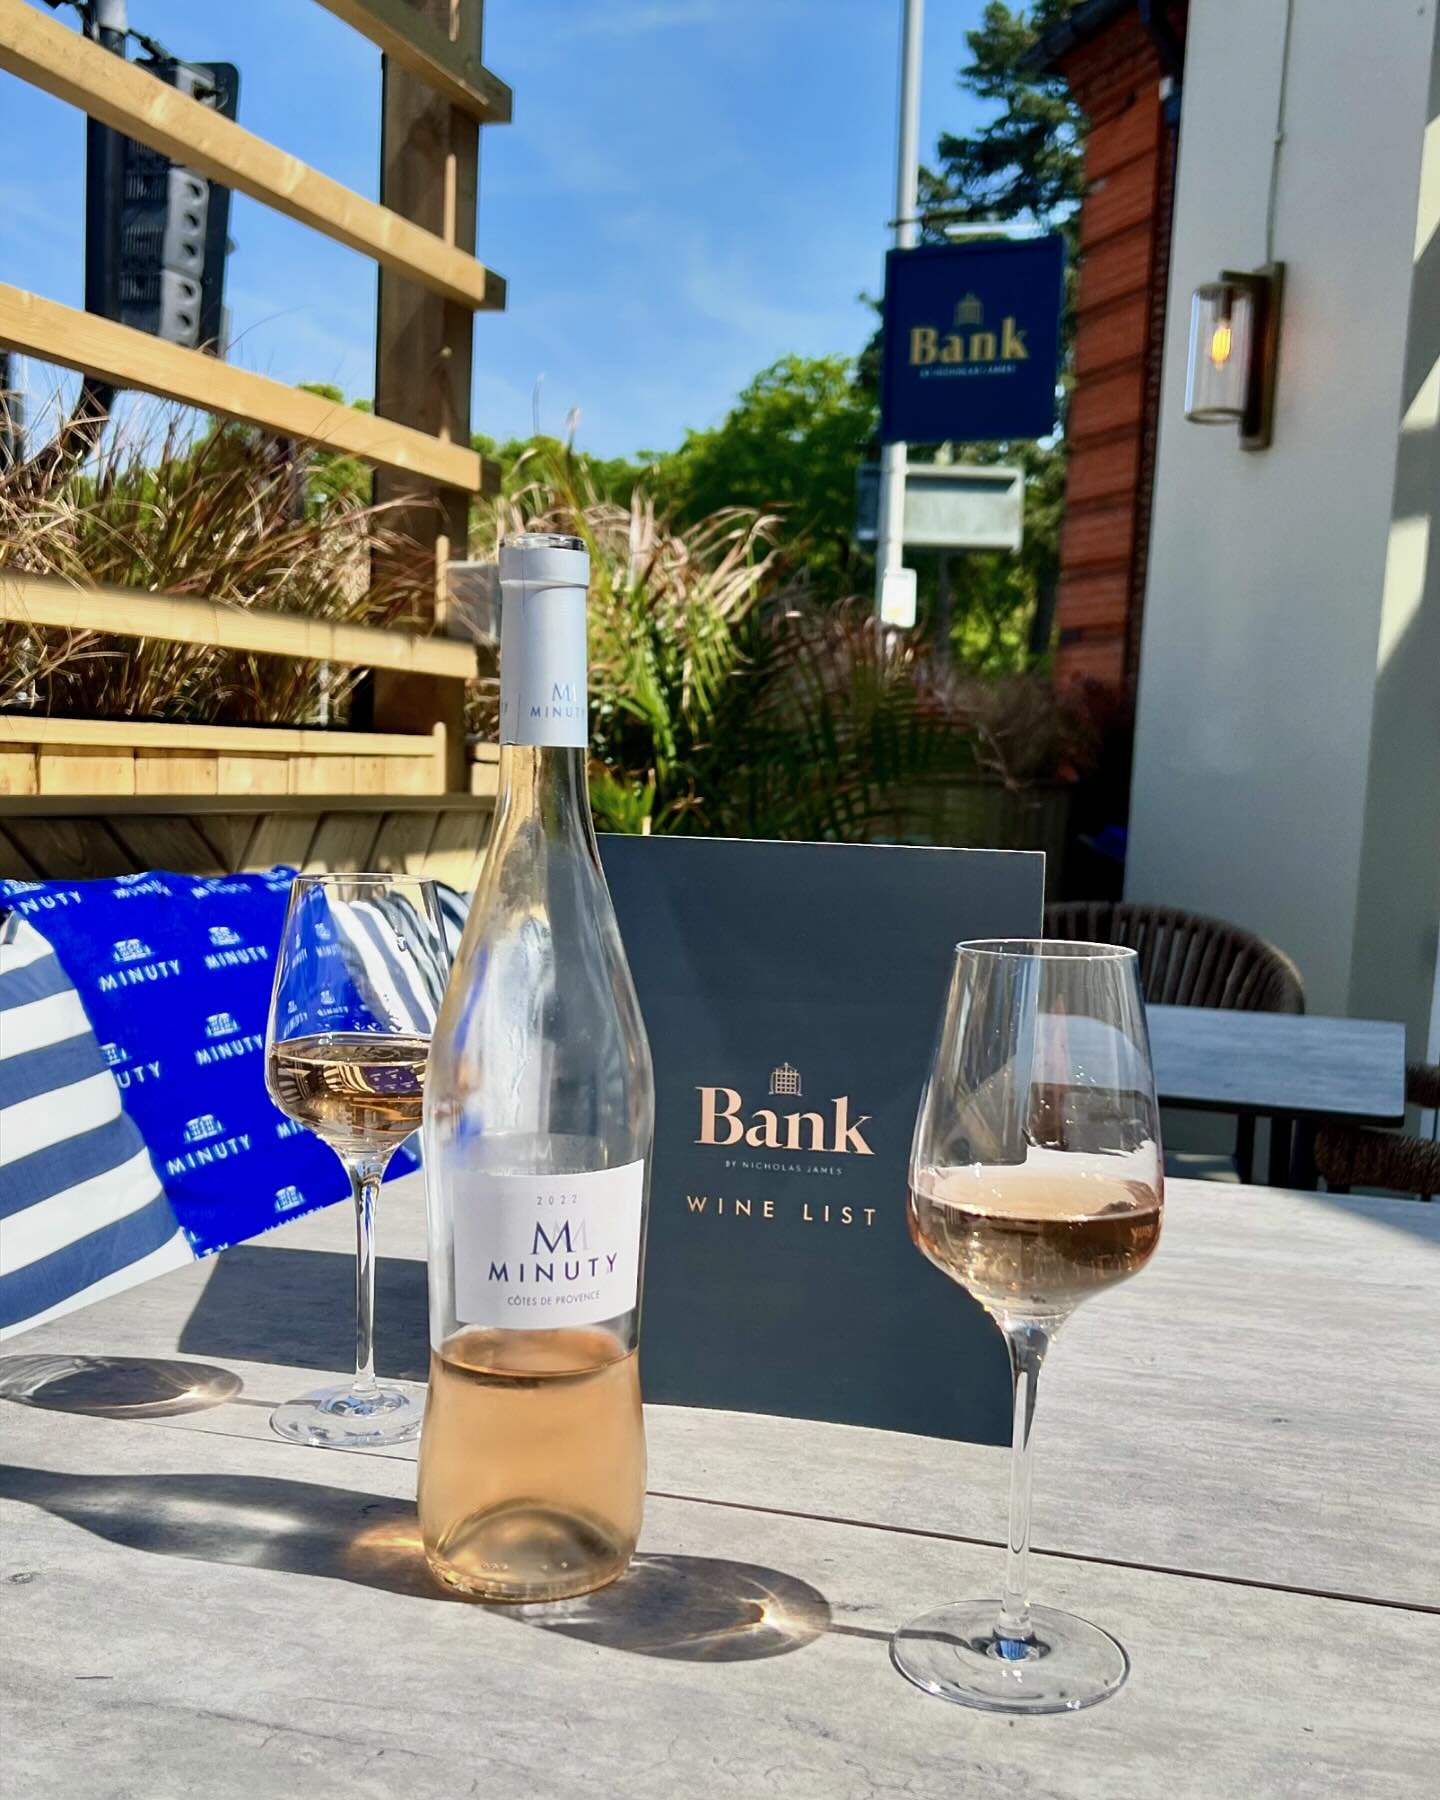 Tuesday treats at BANK! 🍷

The MINUTY is calling! After-work drinks done right! 

Book your spot via the link in our bio, or simply walk in and join us

Let&rsquo;s make every sunny moment count! ☀️

Cheers to Tuesday! 🥂 

#tuesdaytreats #afterwork